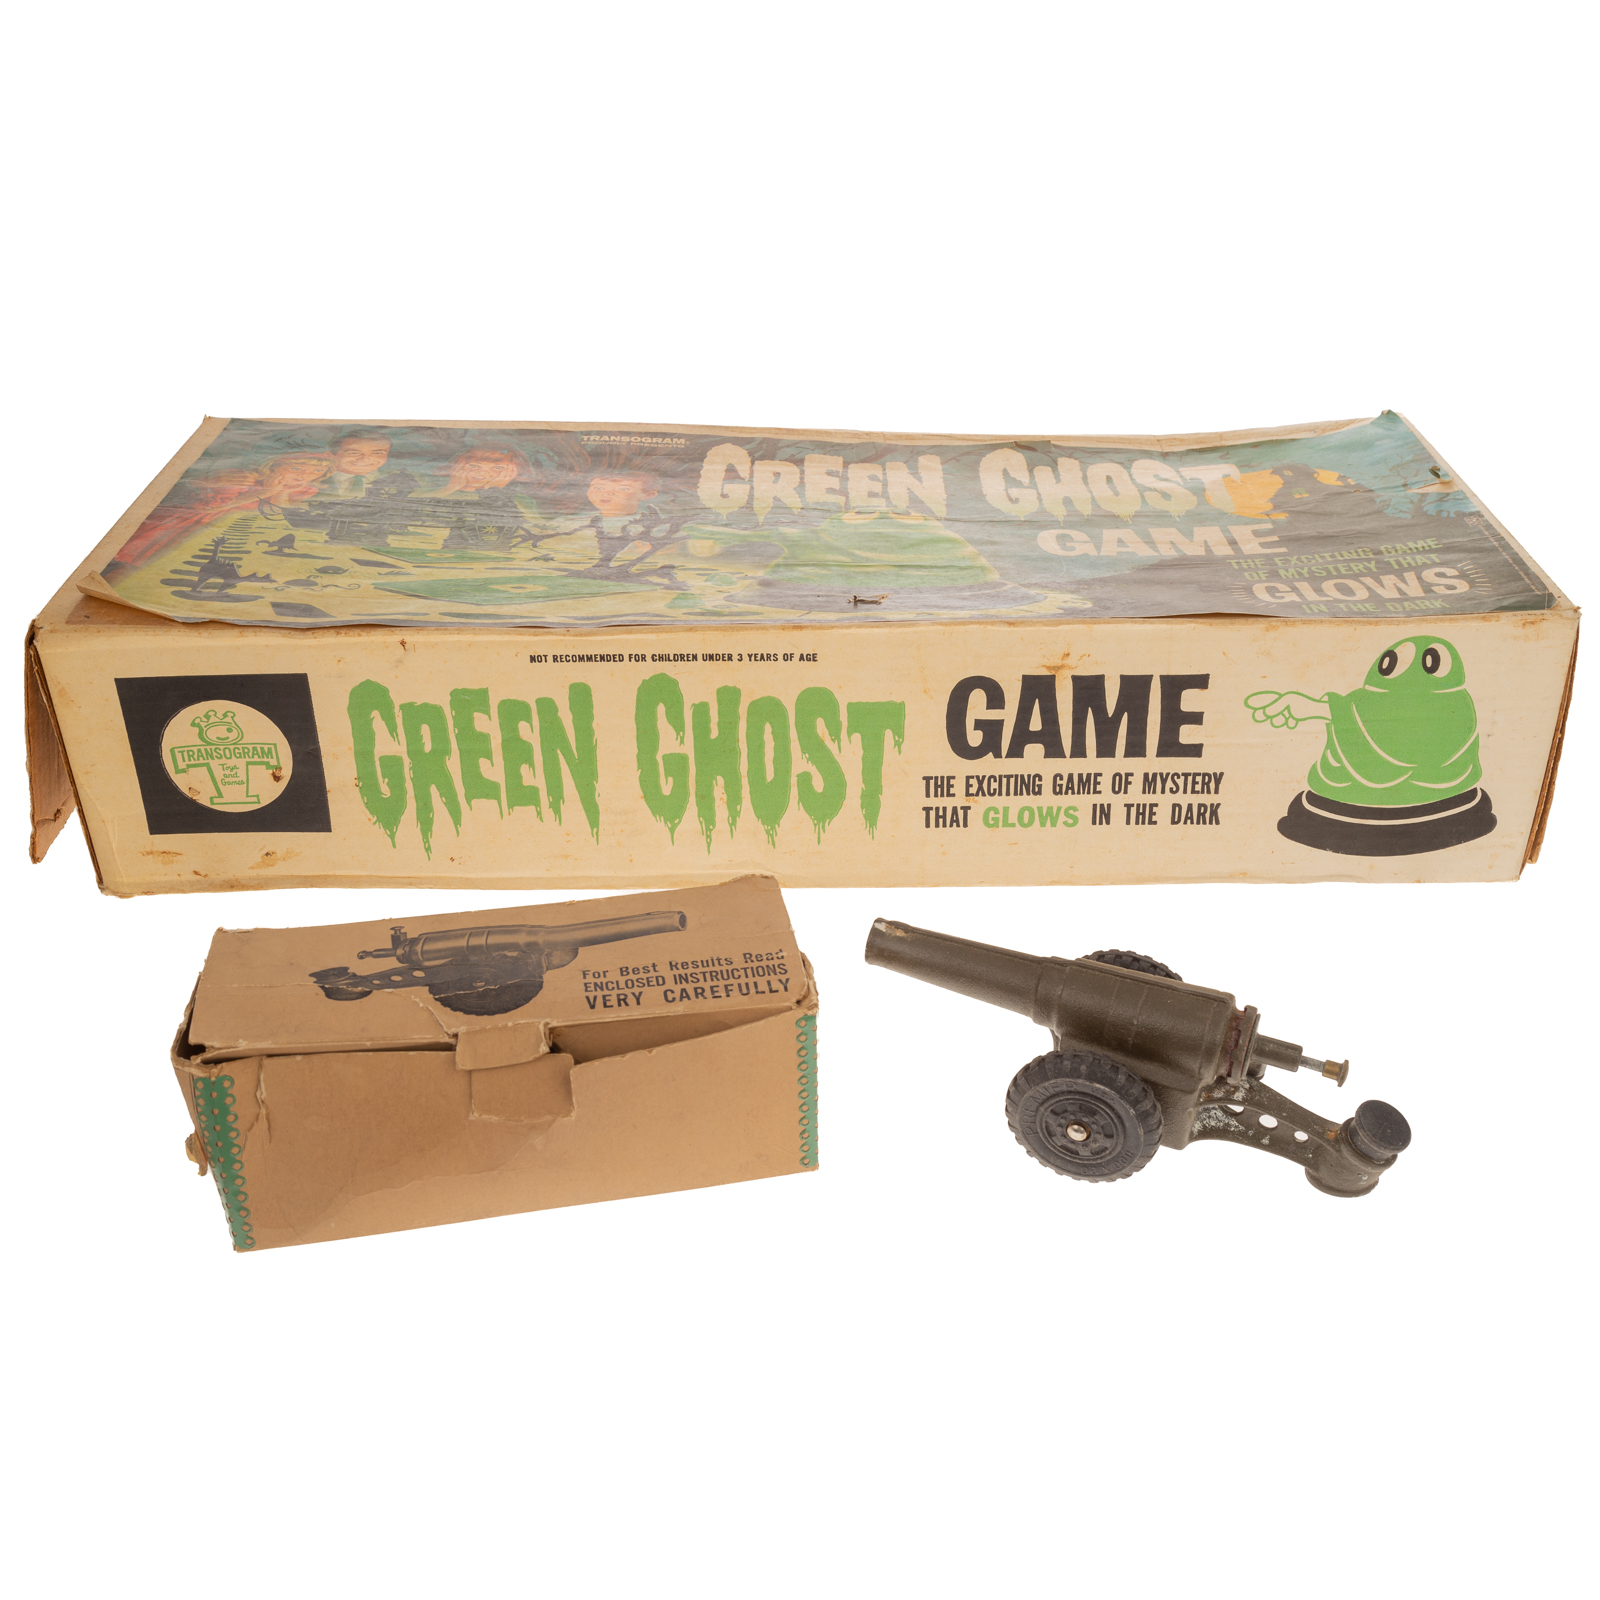 GREEN GHOST GAME & BIG BANG CANNON